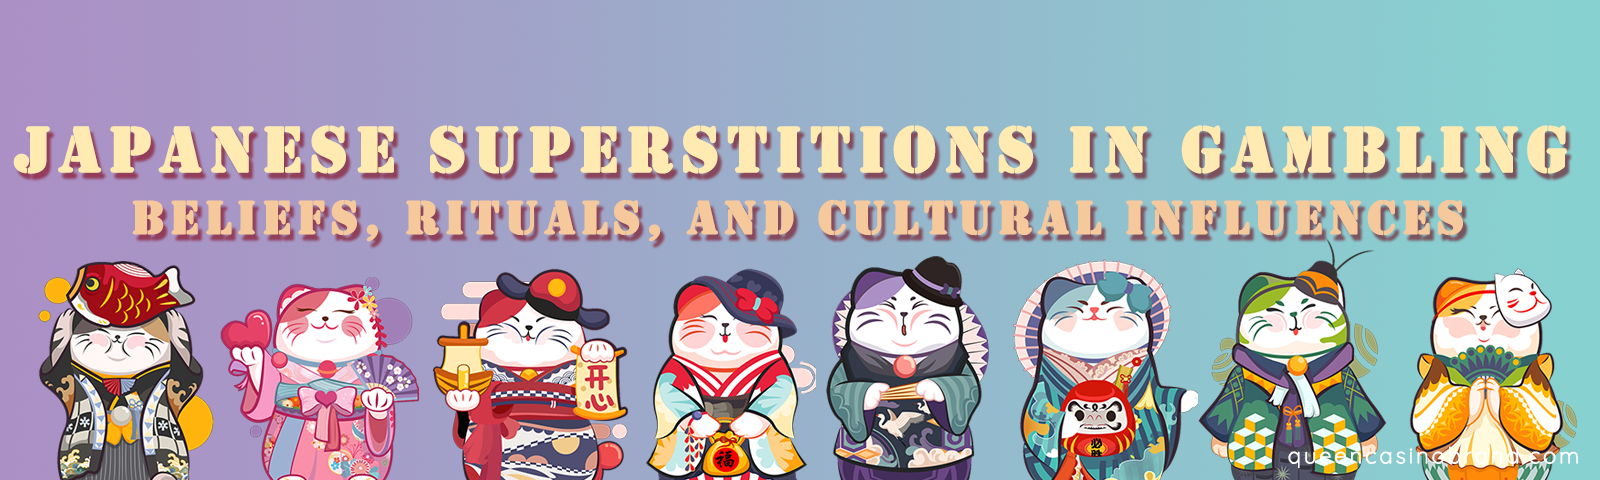 Japanese Superstitions in Gambling Beliefs, Rituals, and Cultural Influences